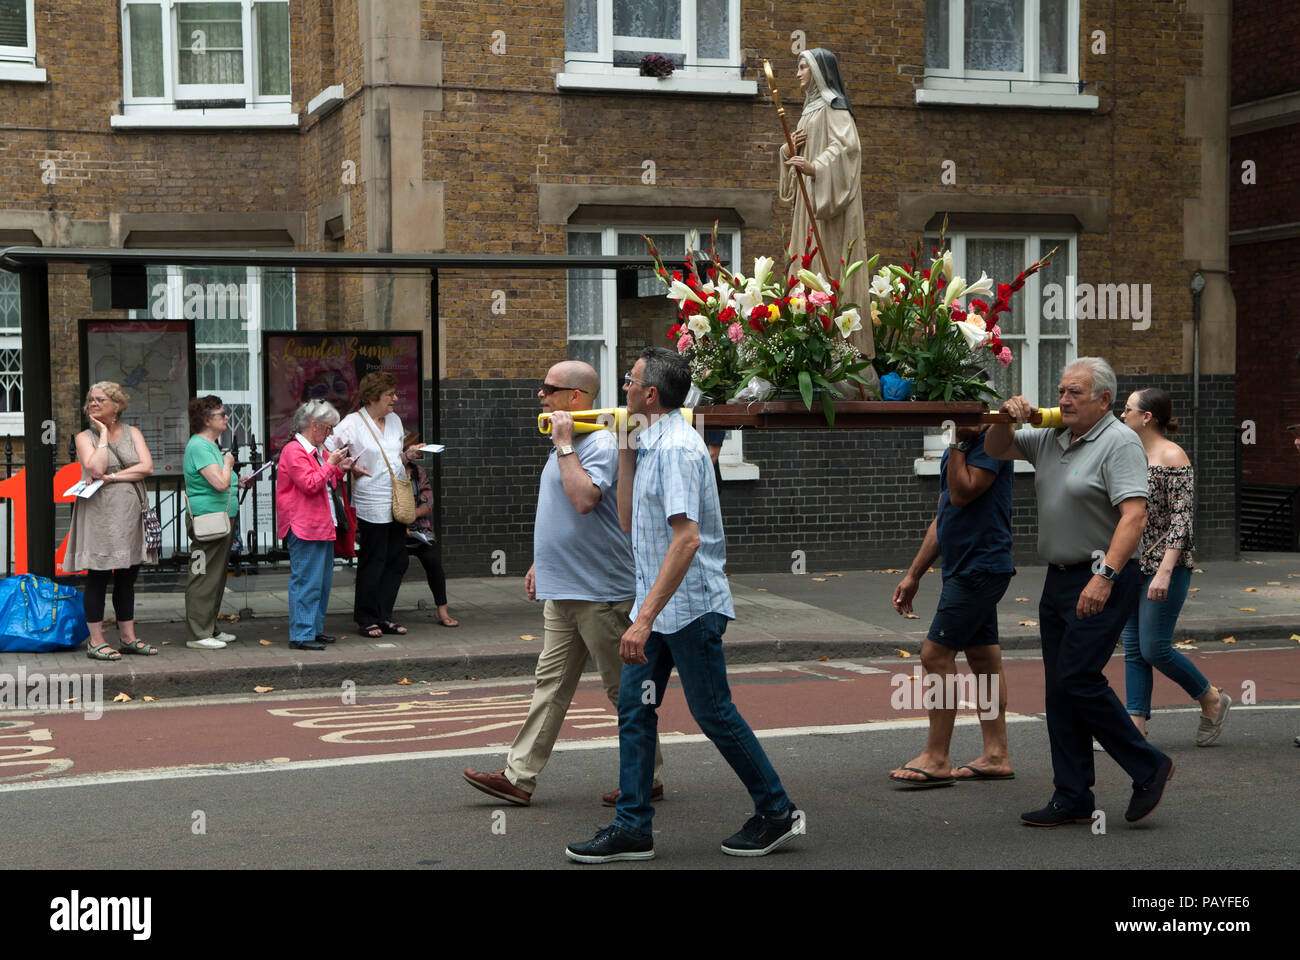 Roman Catholic procession Christianity UK. Italian community annual procession in Honour of Our Lady of Mount Carmel. St Peters Italian Church, Clerkenwell, London people watching religious statue pass by. 2018 2010s HOMER SYKES Stock Photo